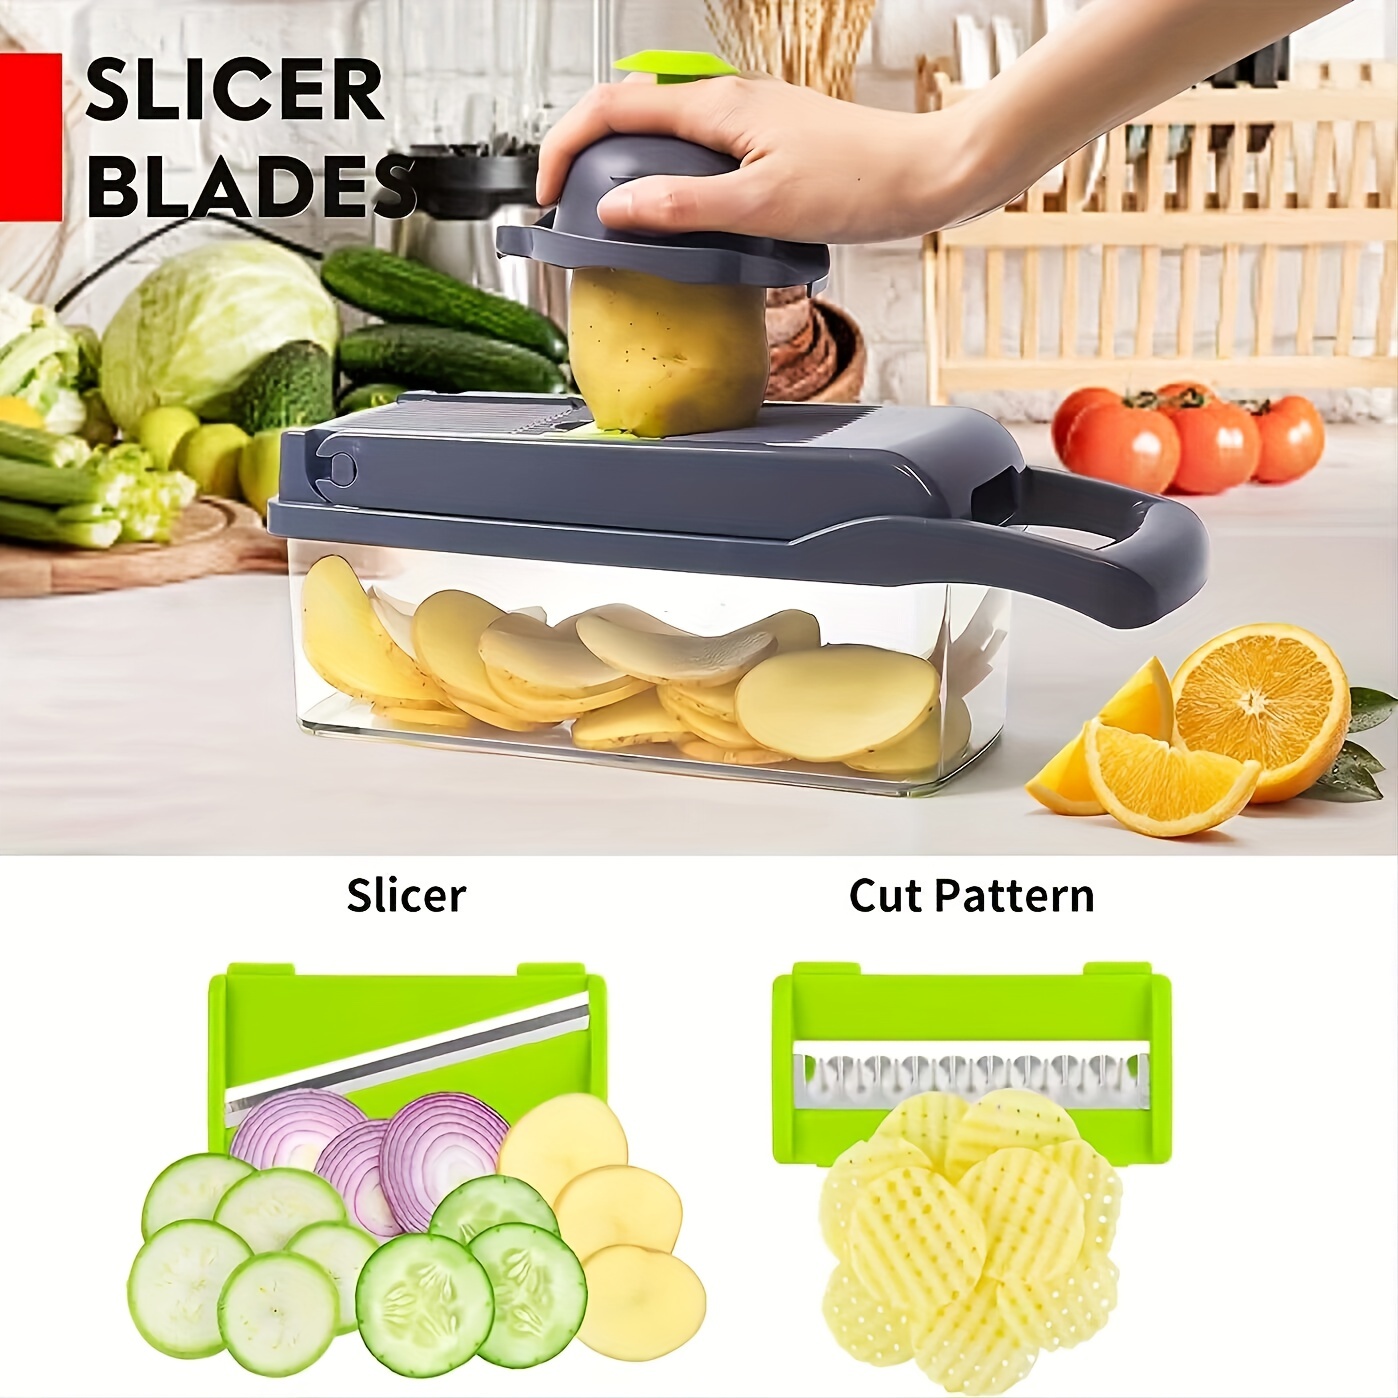 1pc Kitchen Vegetable Chopper 13 in 1 Food Cutter With 8 Stainless Steel Blades And Container Ideal For Slicing Onions Garlic And More 34 8x11 94 Cm